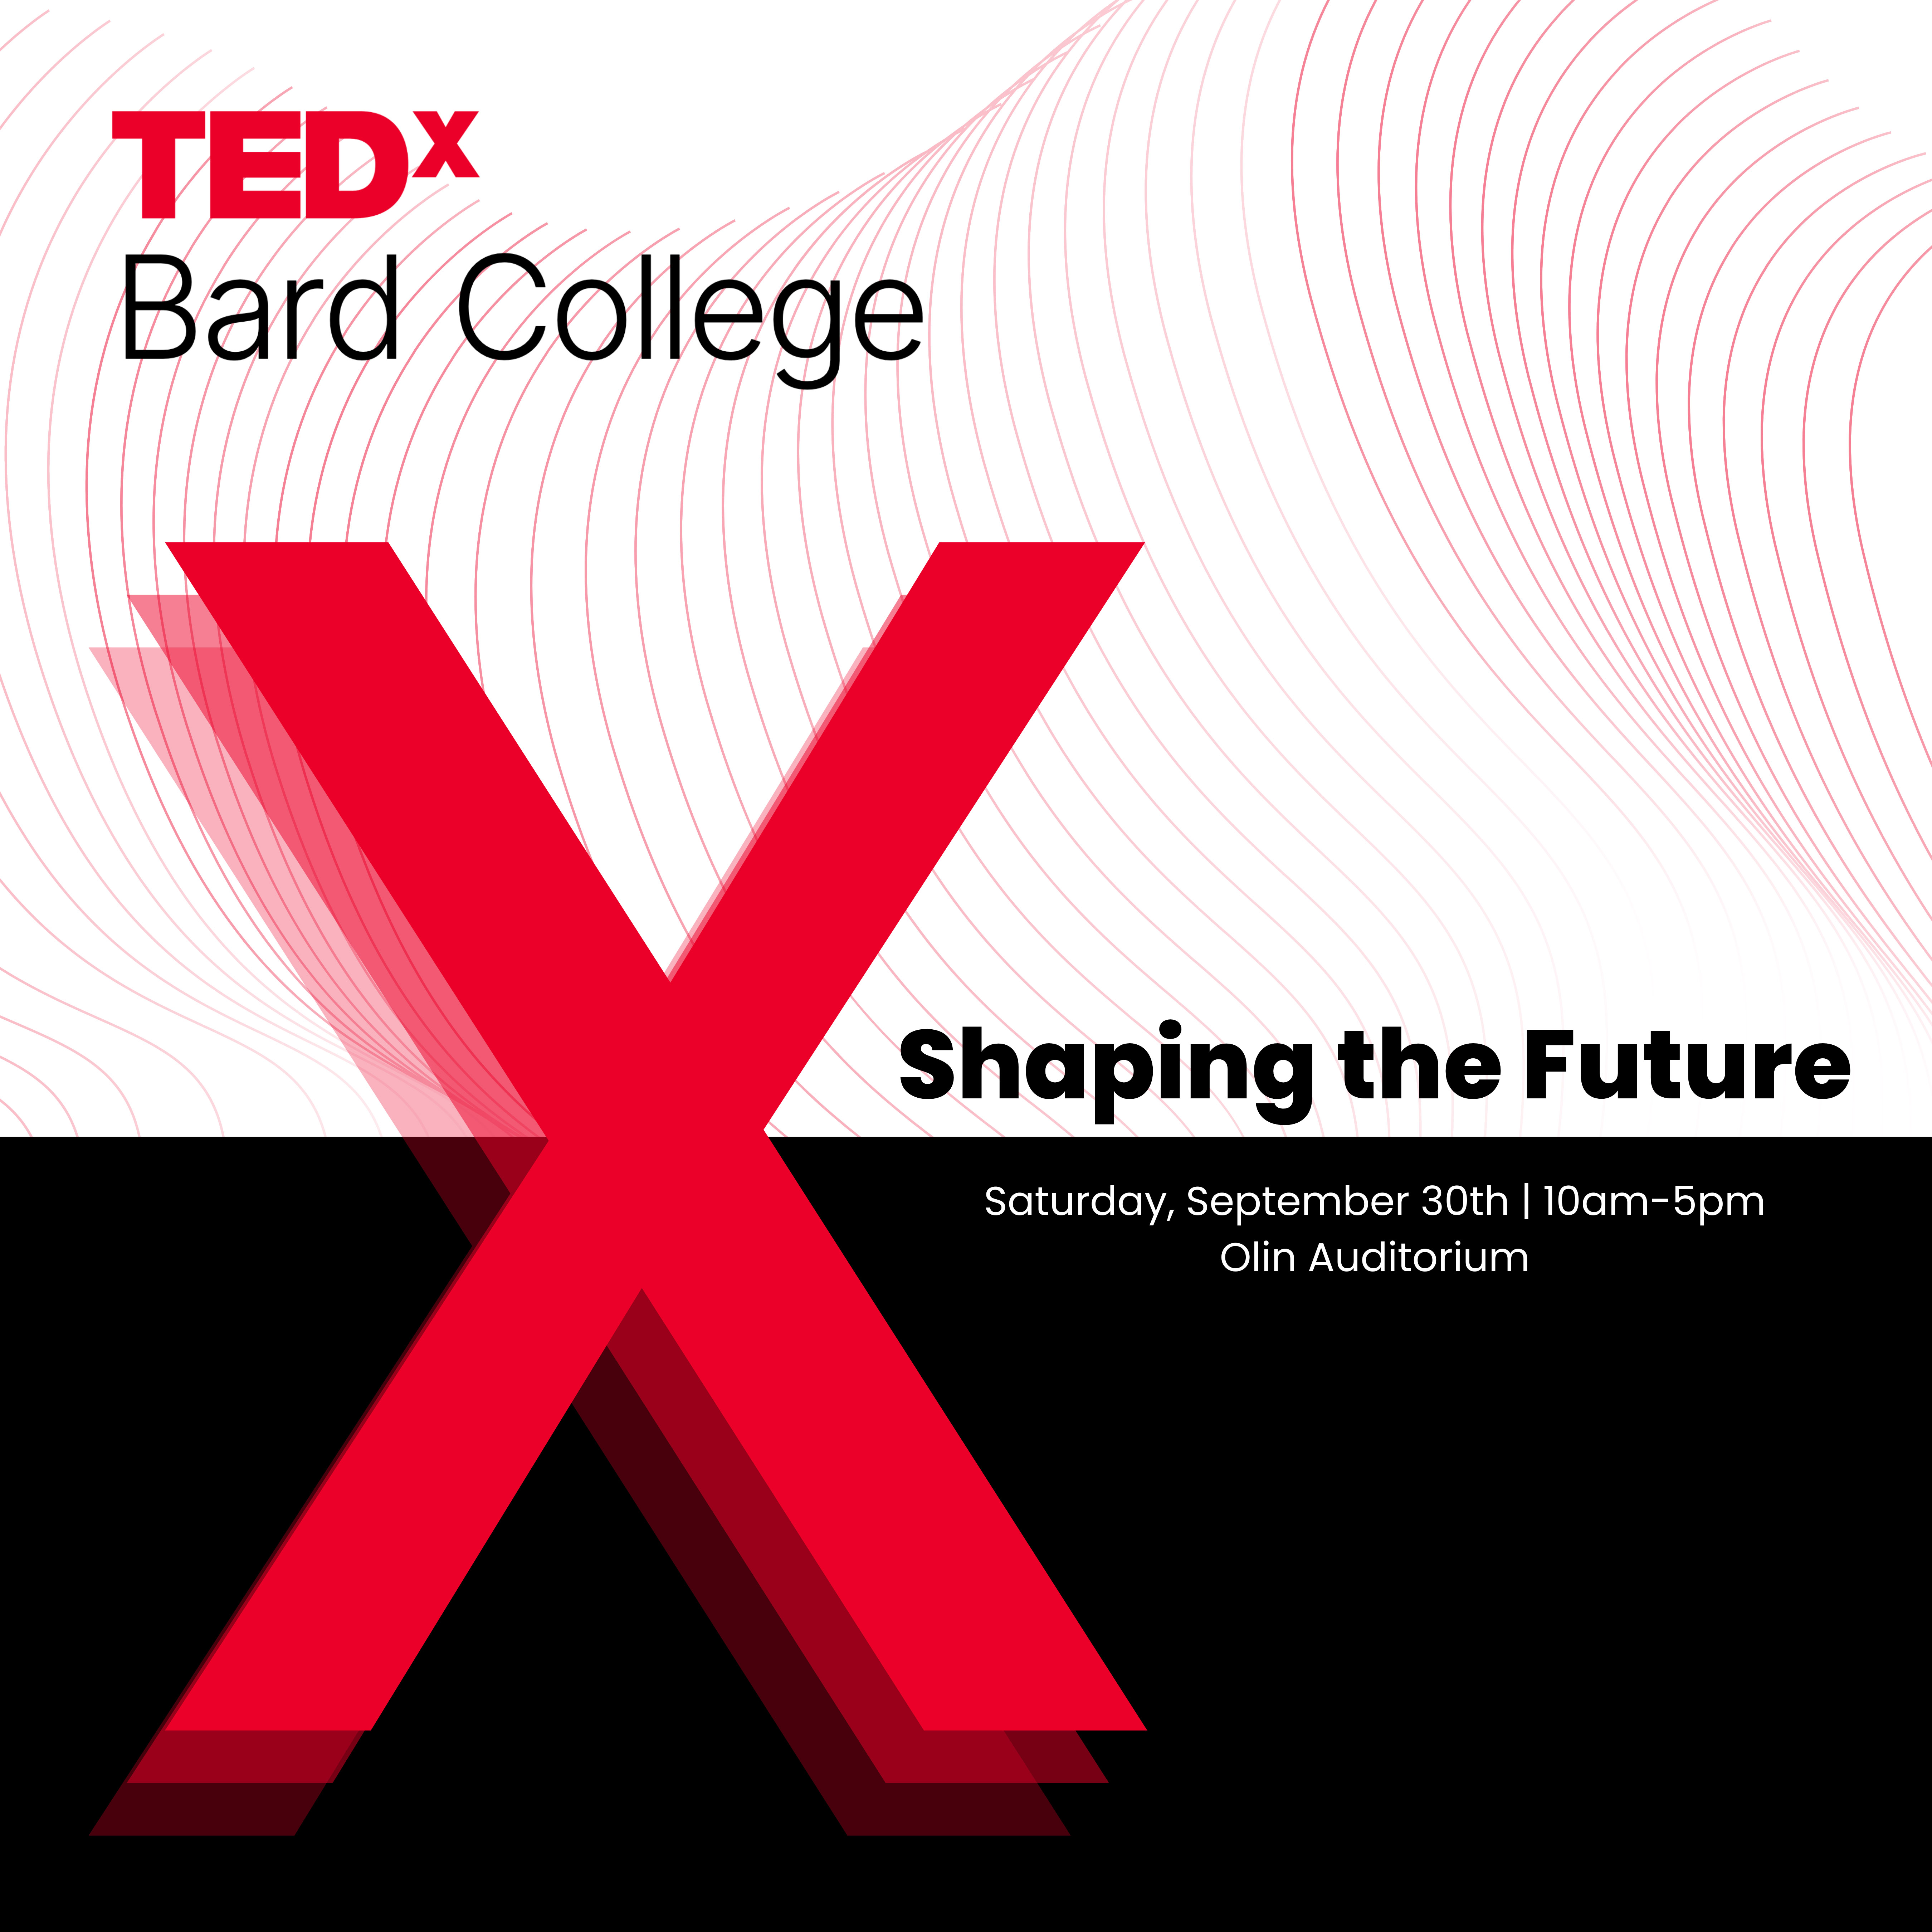 &ldquo;Shaping the Future&rdquo; Conference Hosted by TEDxBard College on September 30